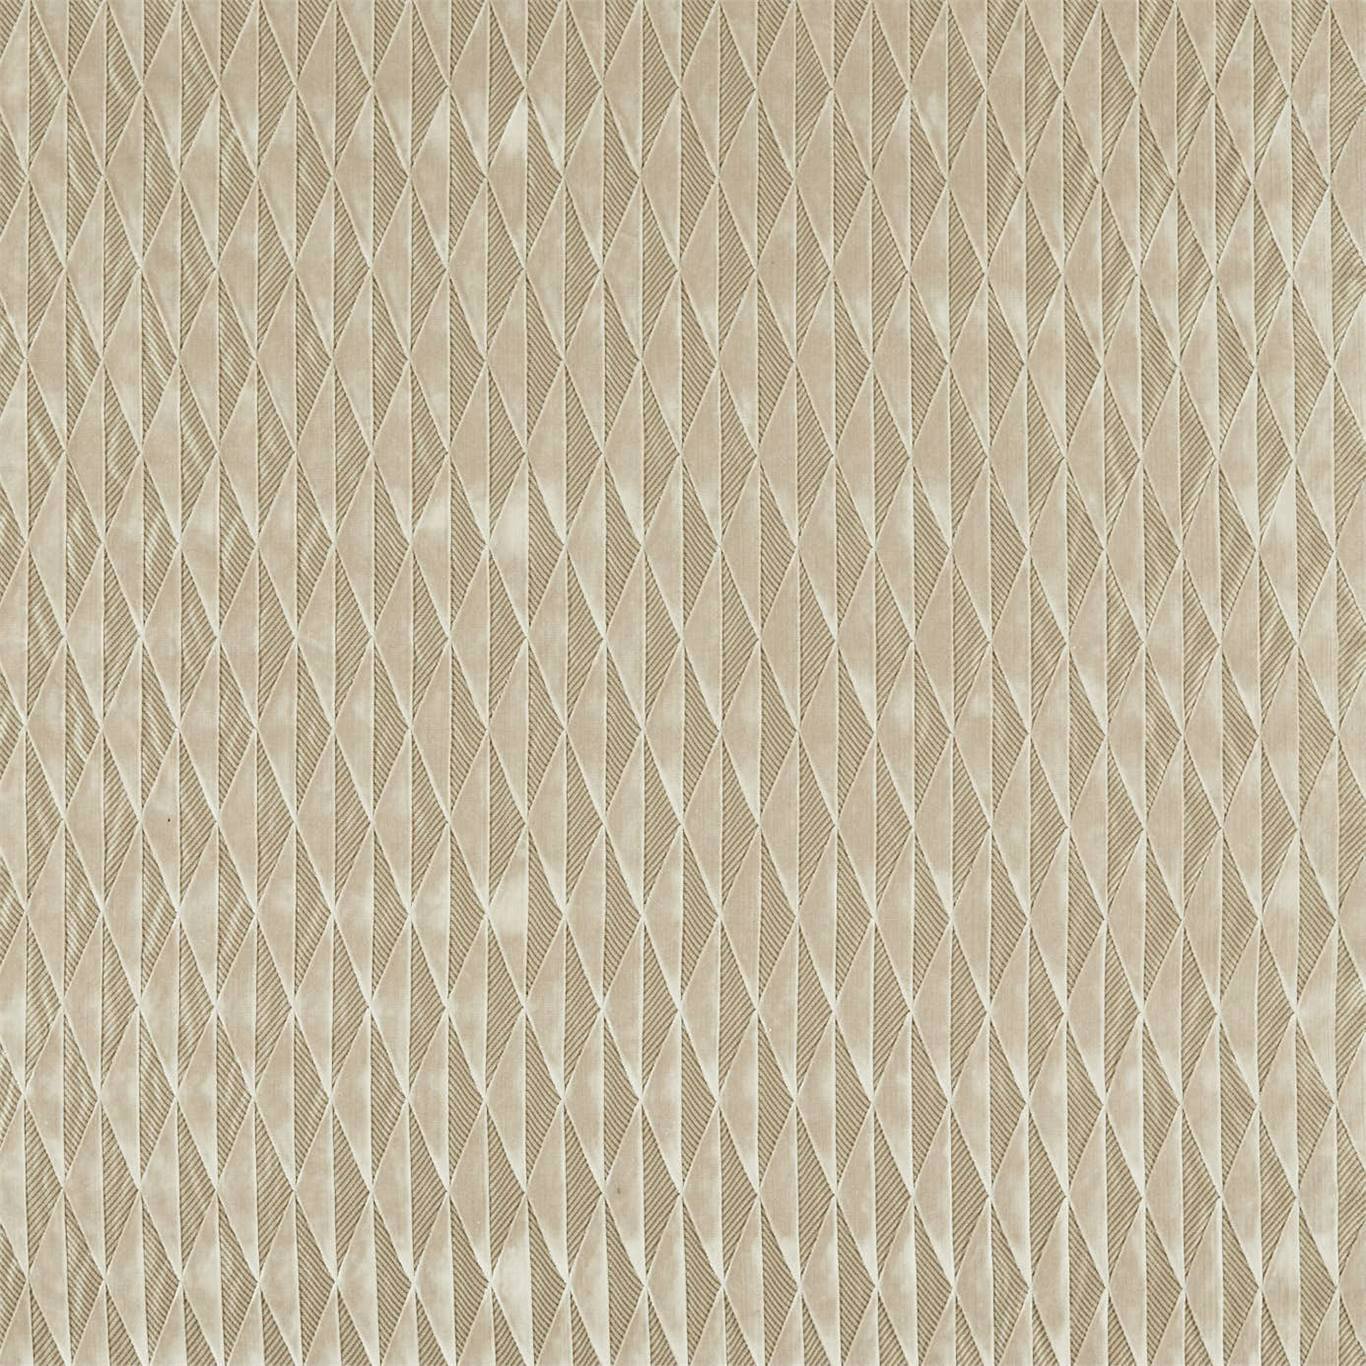 Irradiant Linen Fabric by HAR